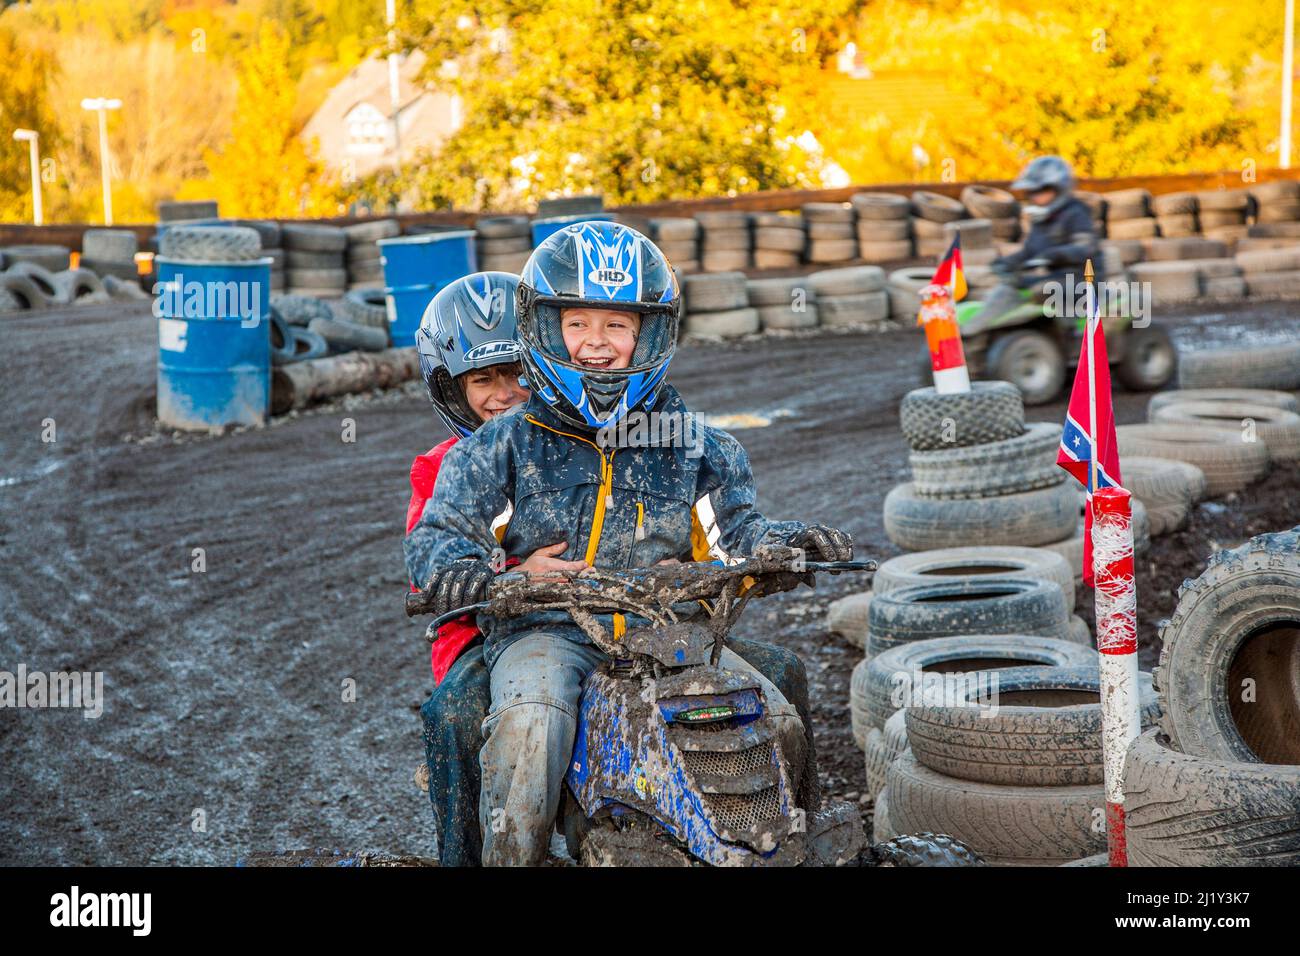 Schmitten, Germany - October 19, 2009: children love to race with a quad at the muddy quad track. Stock Photo